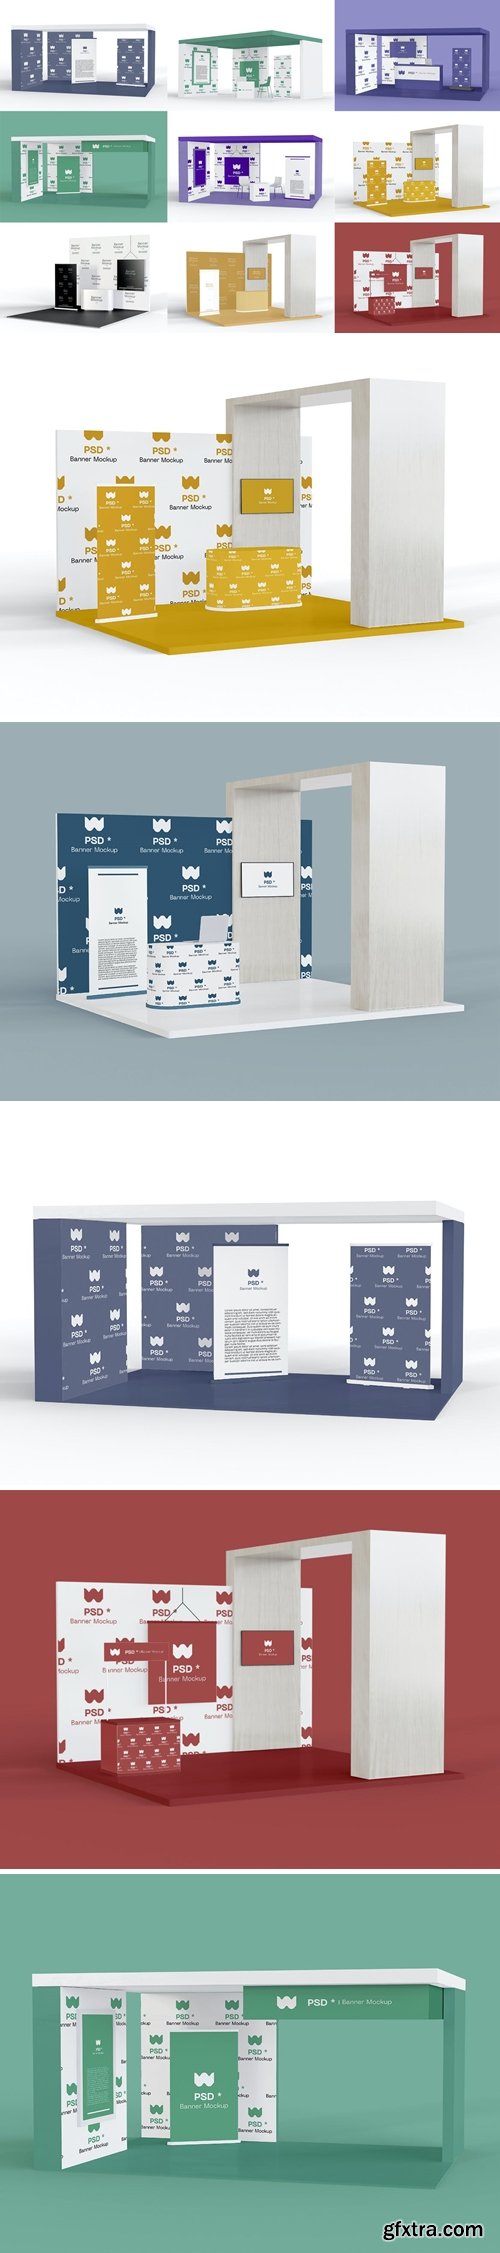 Download Exhibition Stands Mockup » GFxtra